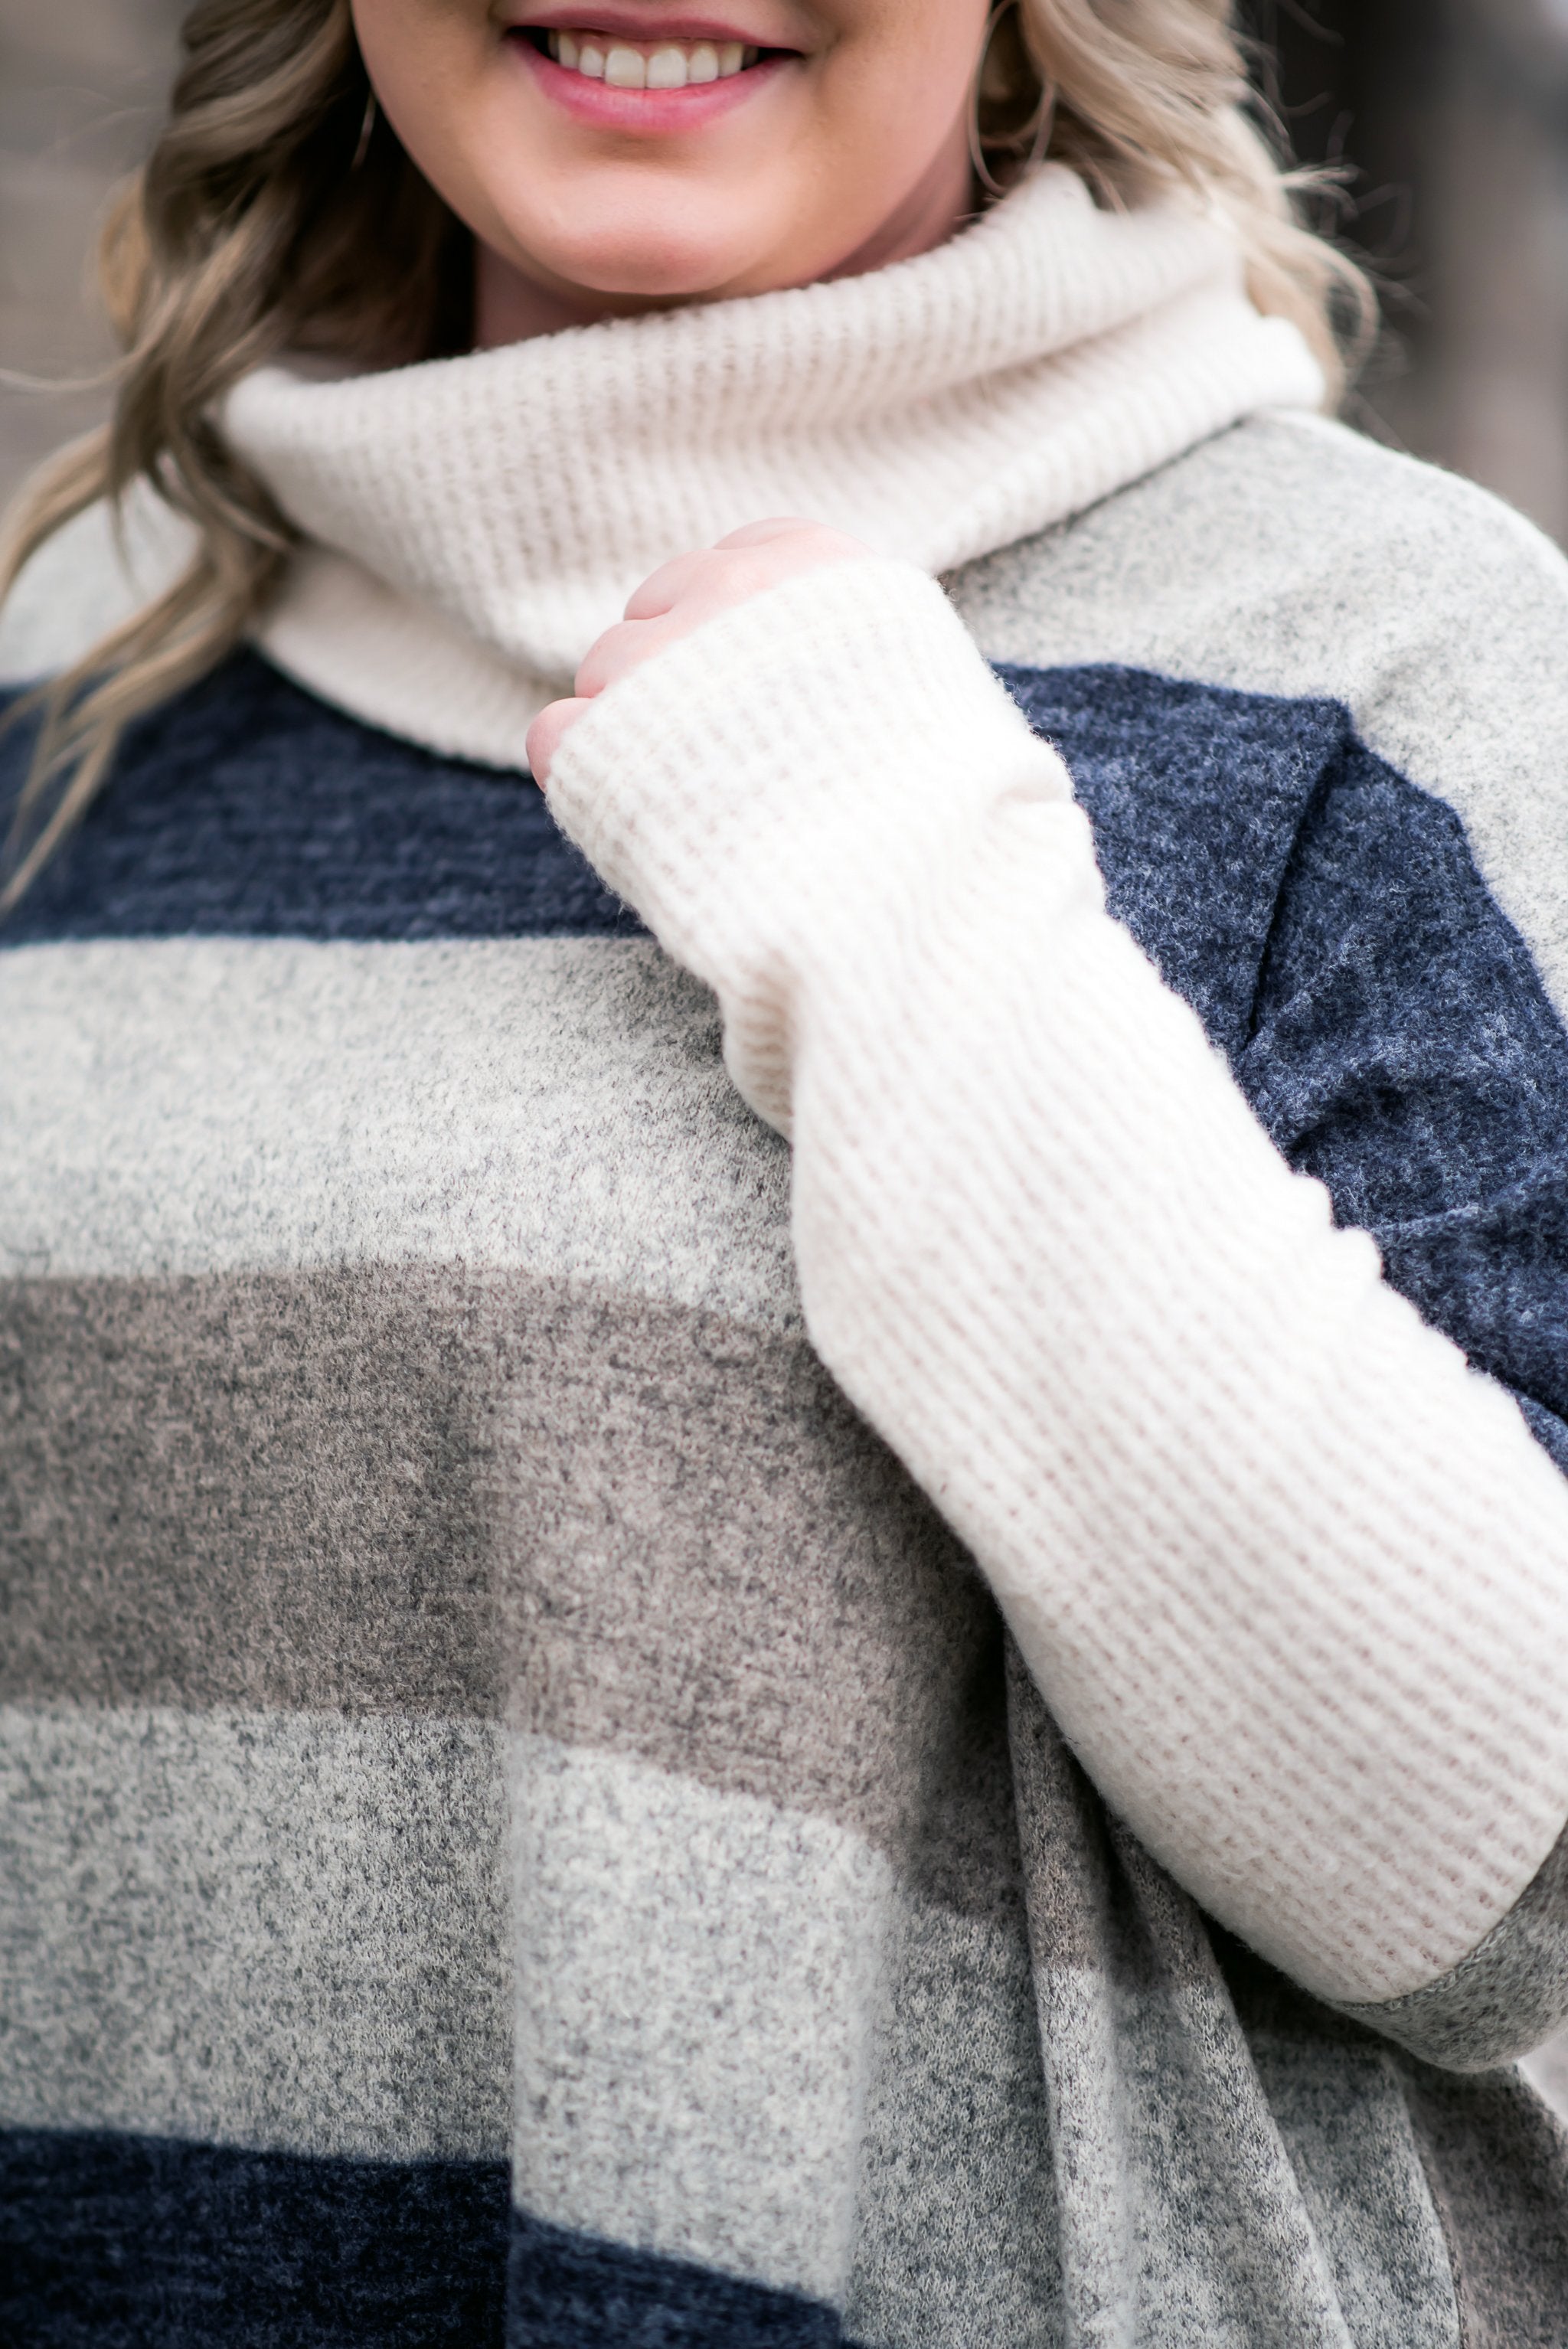 Artic Chill Sweater In Navy Stripes